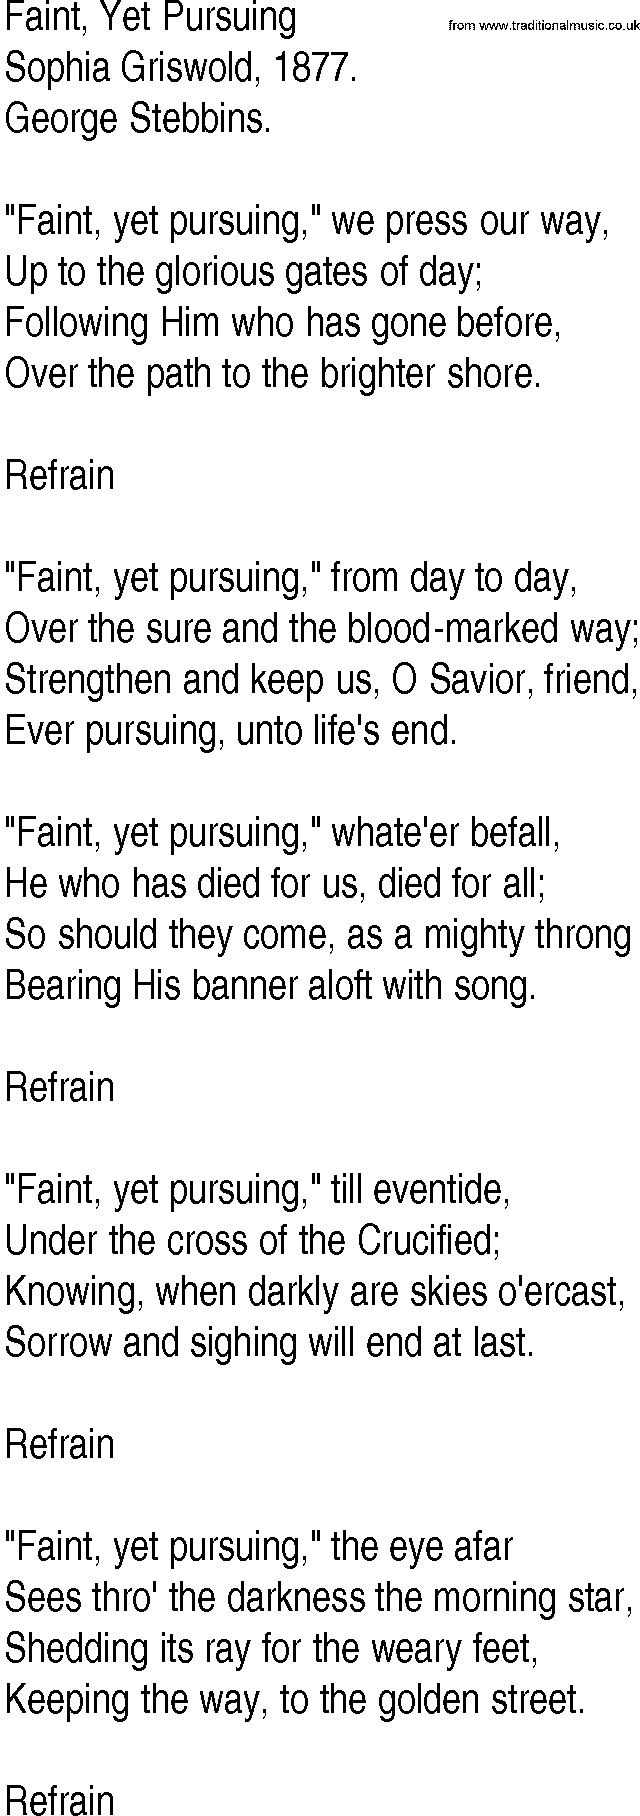 Hymn and Gospel Song: Faint, Yet Pursuing by Sophia Griswold lyrics